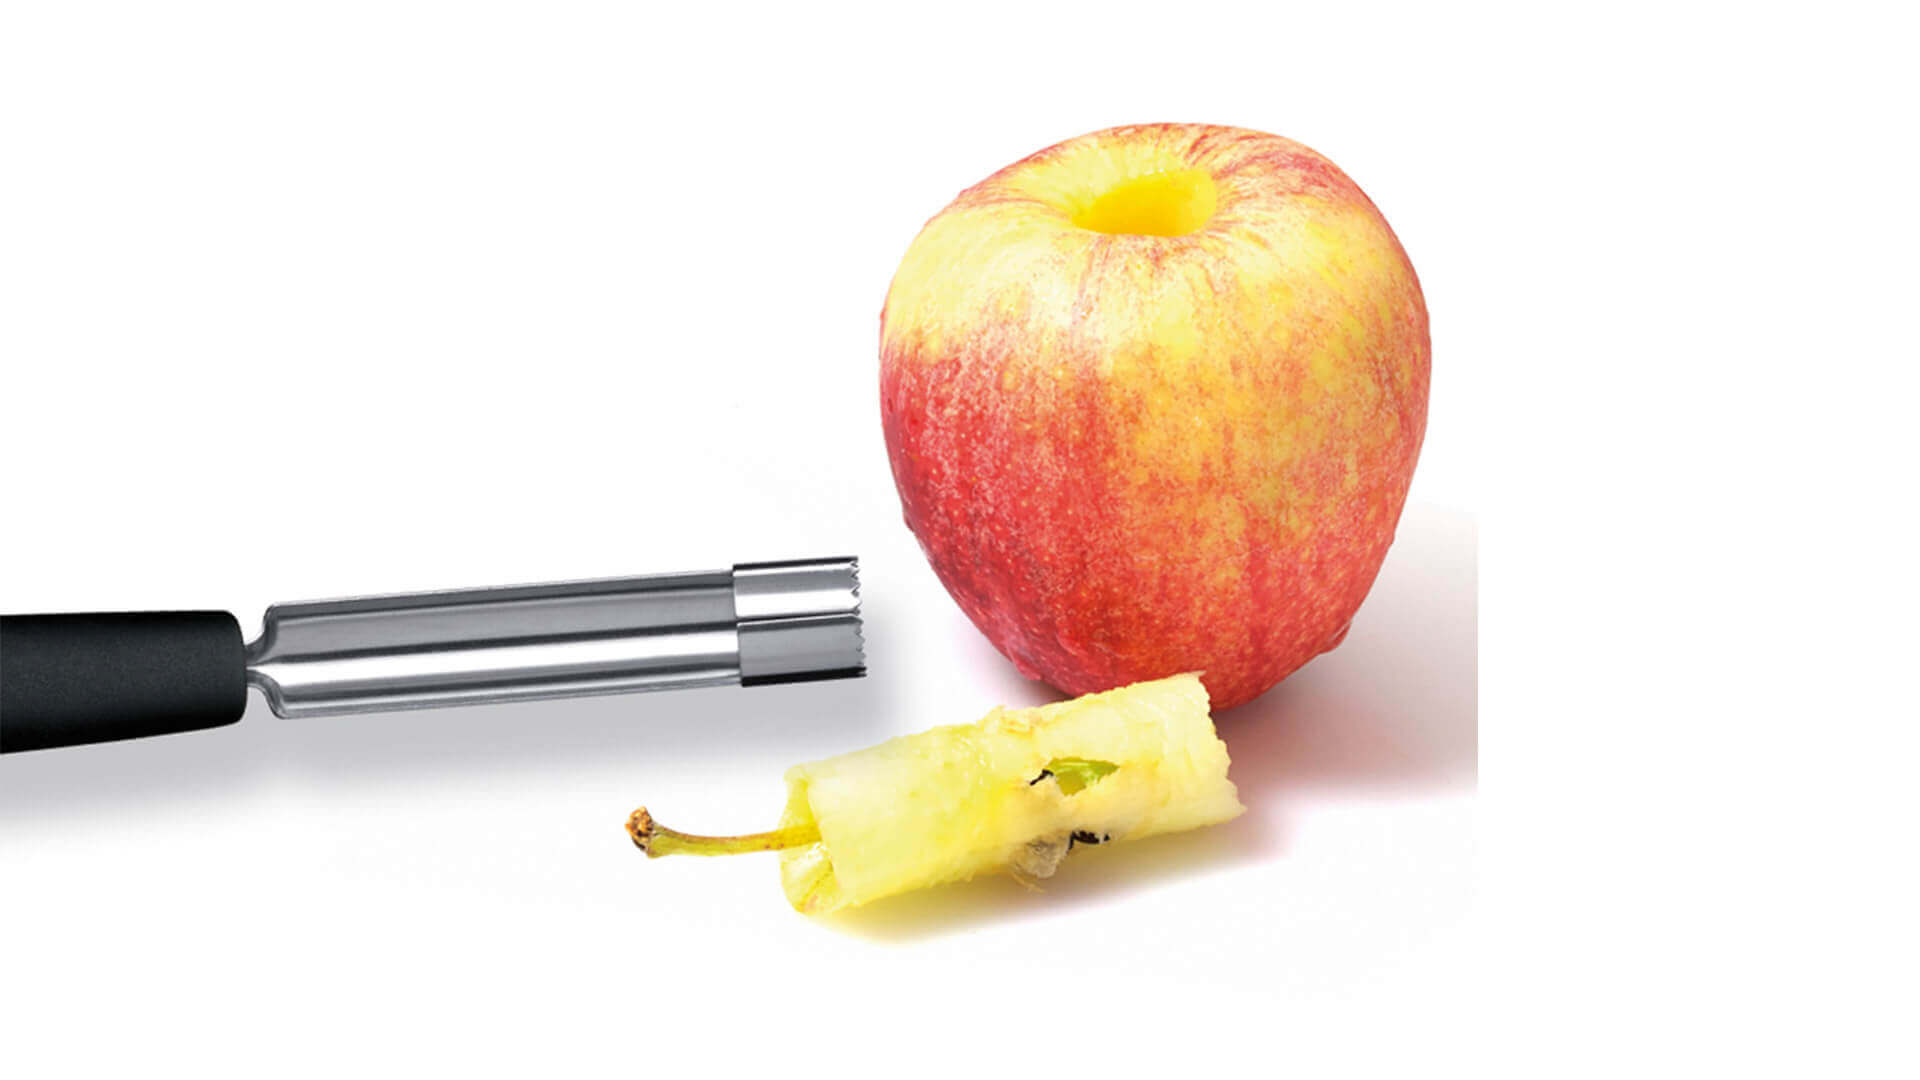 triangle-apple-corer-made-in-germany